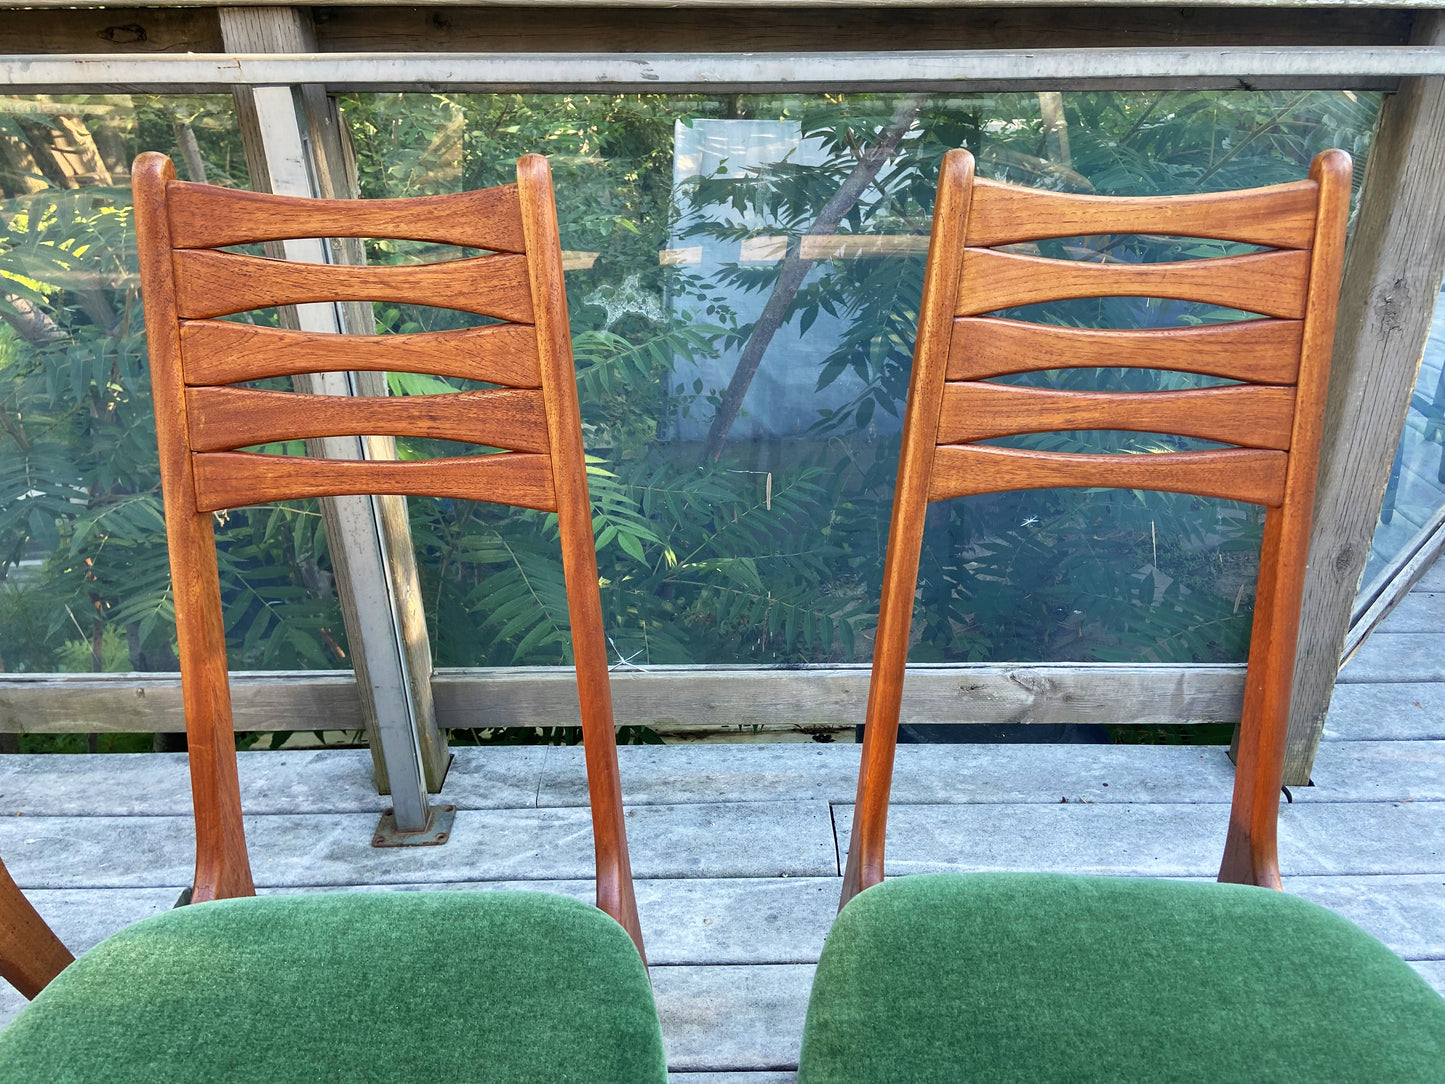 4 REFINISHED REUPHOLSTERED Danish MCM Teak Chairs, wool mohair seats